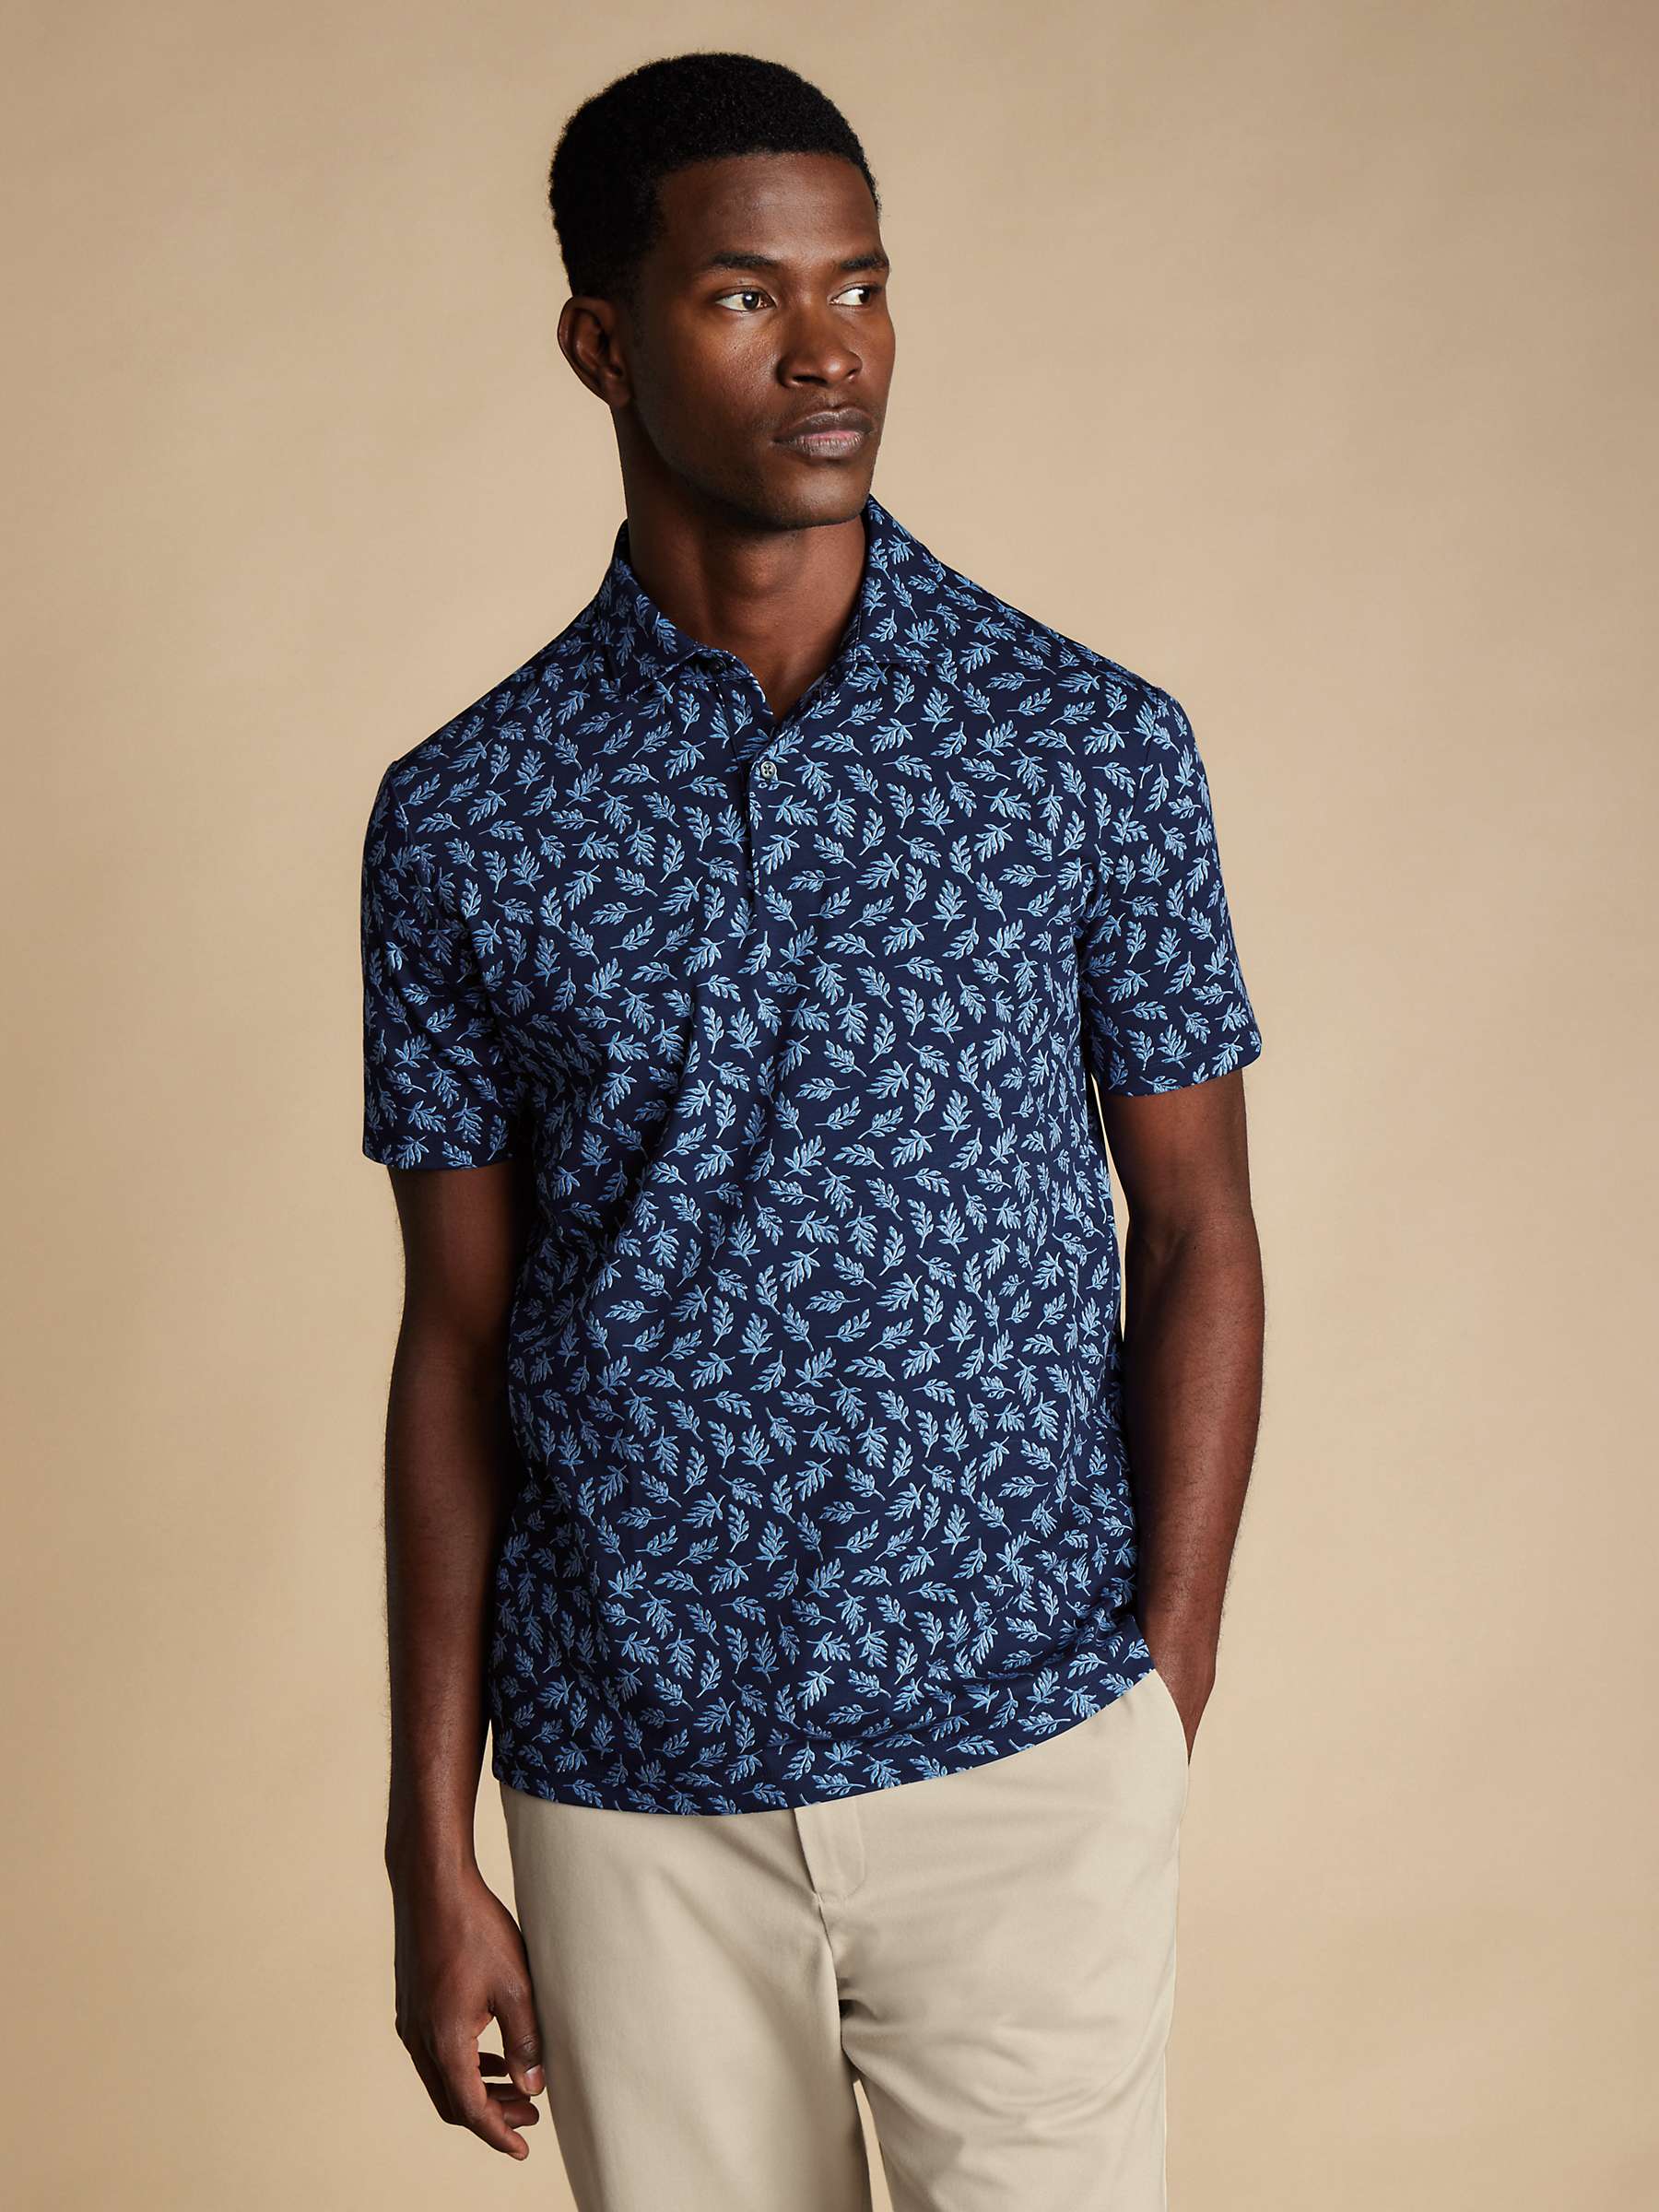 Buy Charles Tyrwhitt Floral Printed Short Sleeve Polo Shirt, French Blue Online at johnlewis.com